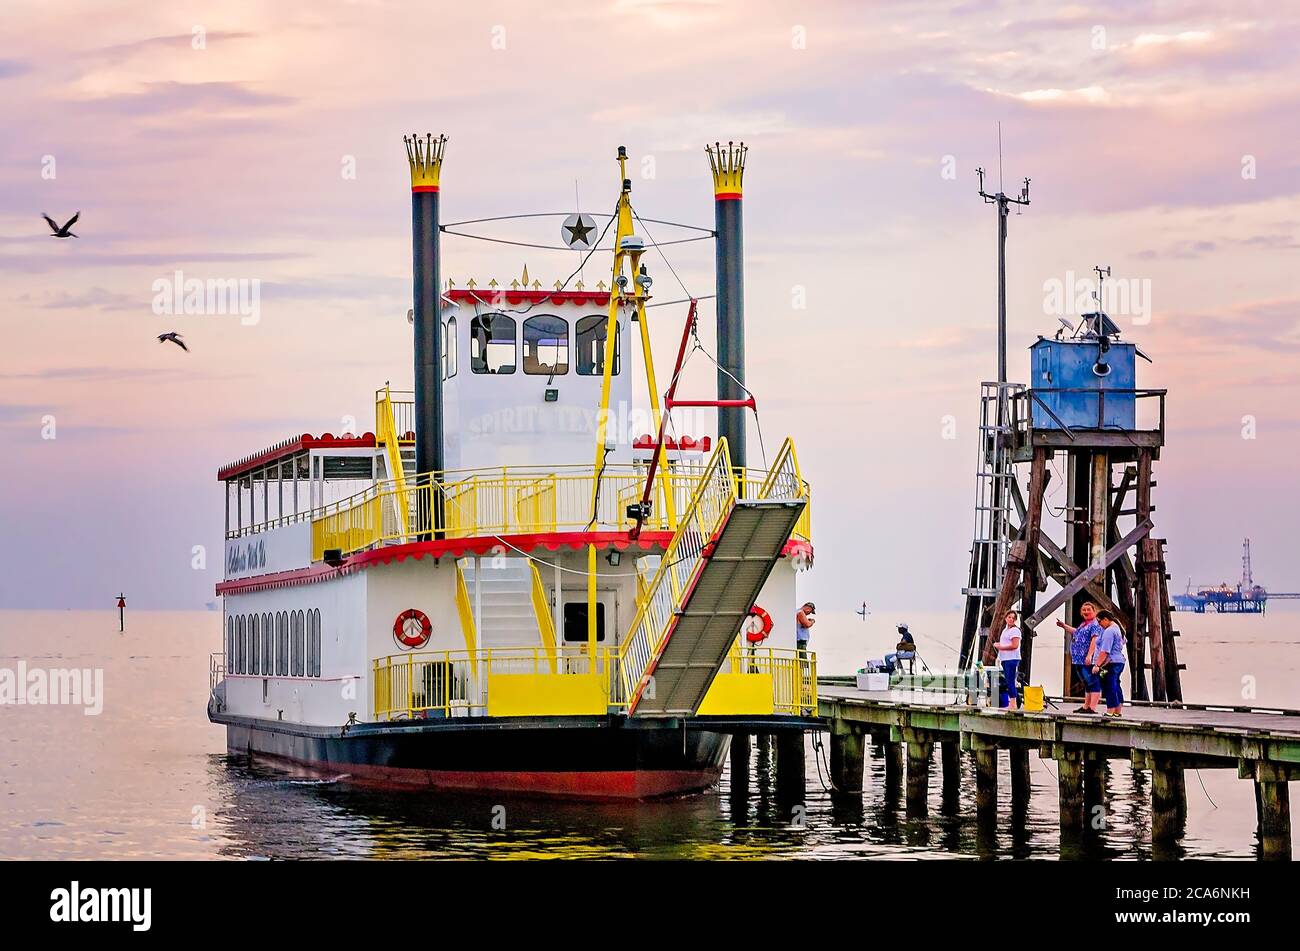 People fish from the public pier alongside the Spirit of Texas paddle wheeler party boat, Aug. 1, 2014, in Dauphin Island, Alabama. Stock Photo